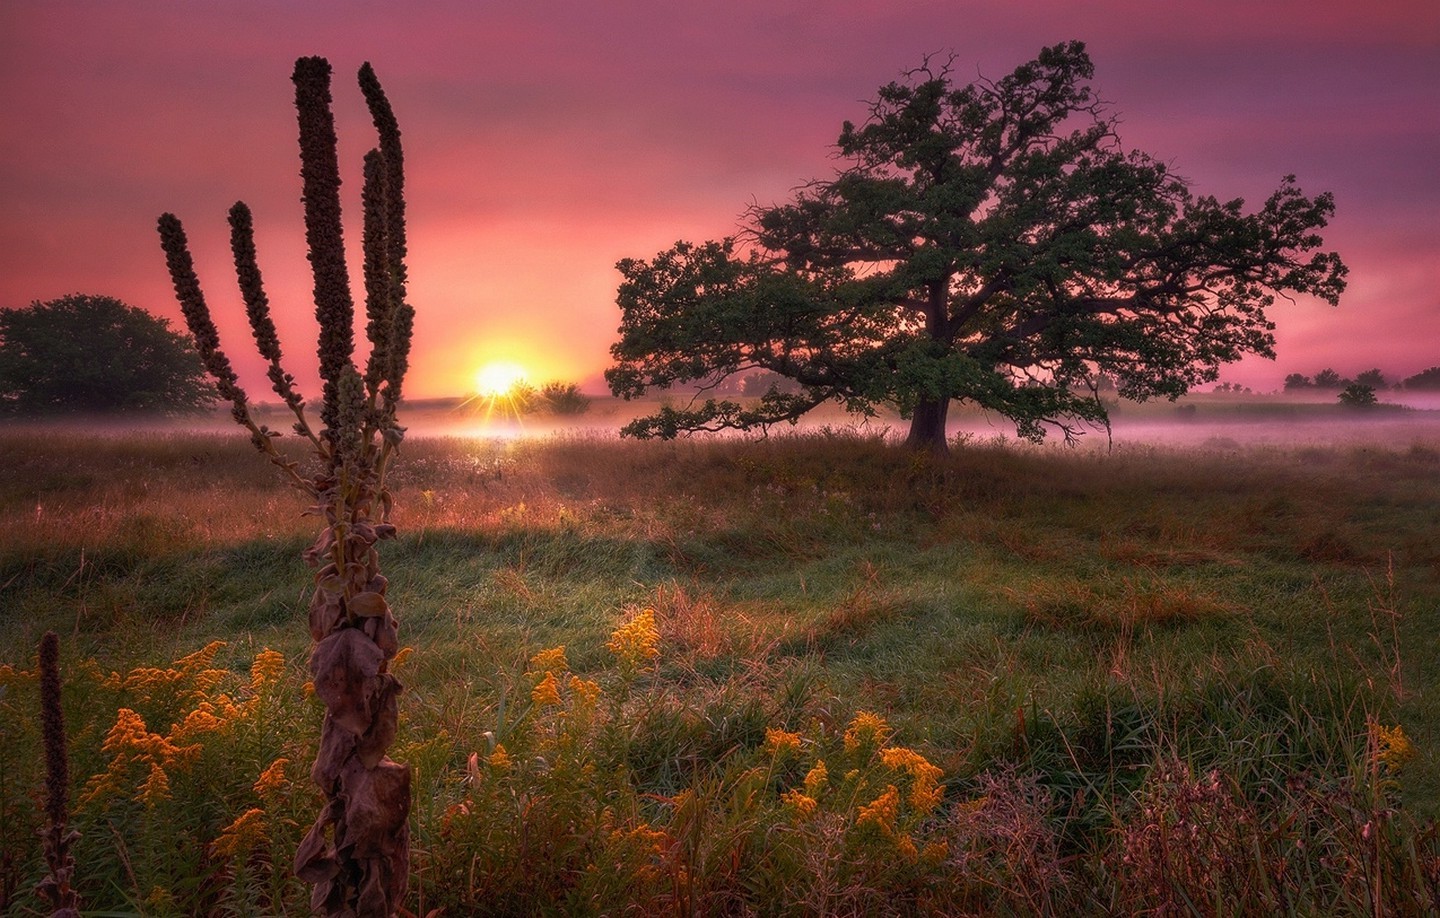 trees, Field, Sunrise, Wildflowers, Mist, Grass, Morning, Clouds, Pink, Yellow, Green, Nature, Landscape Wallpaper